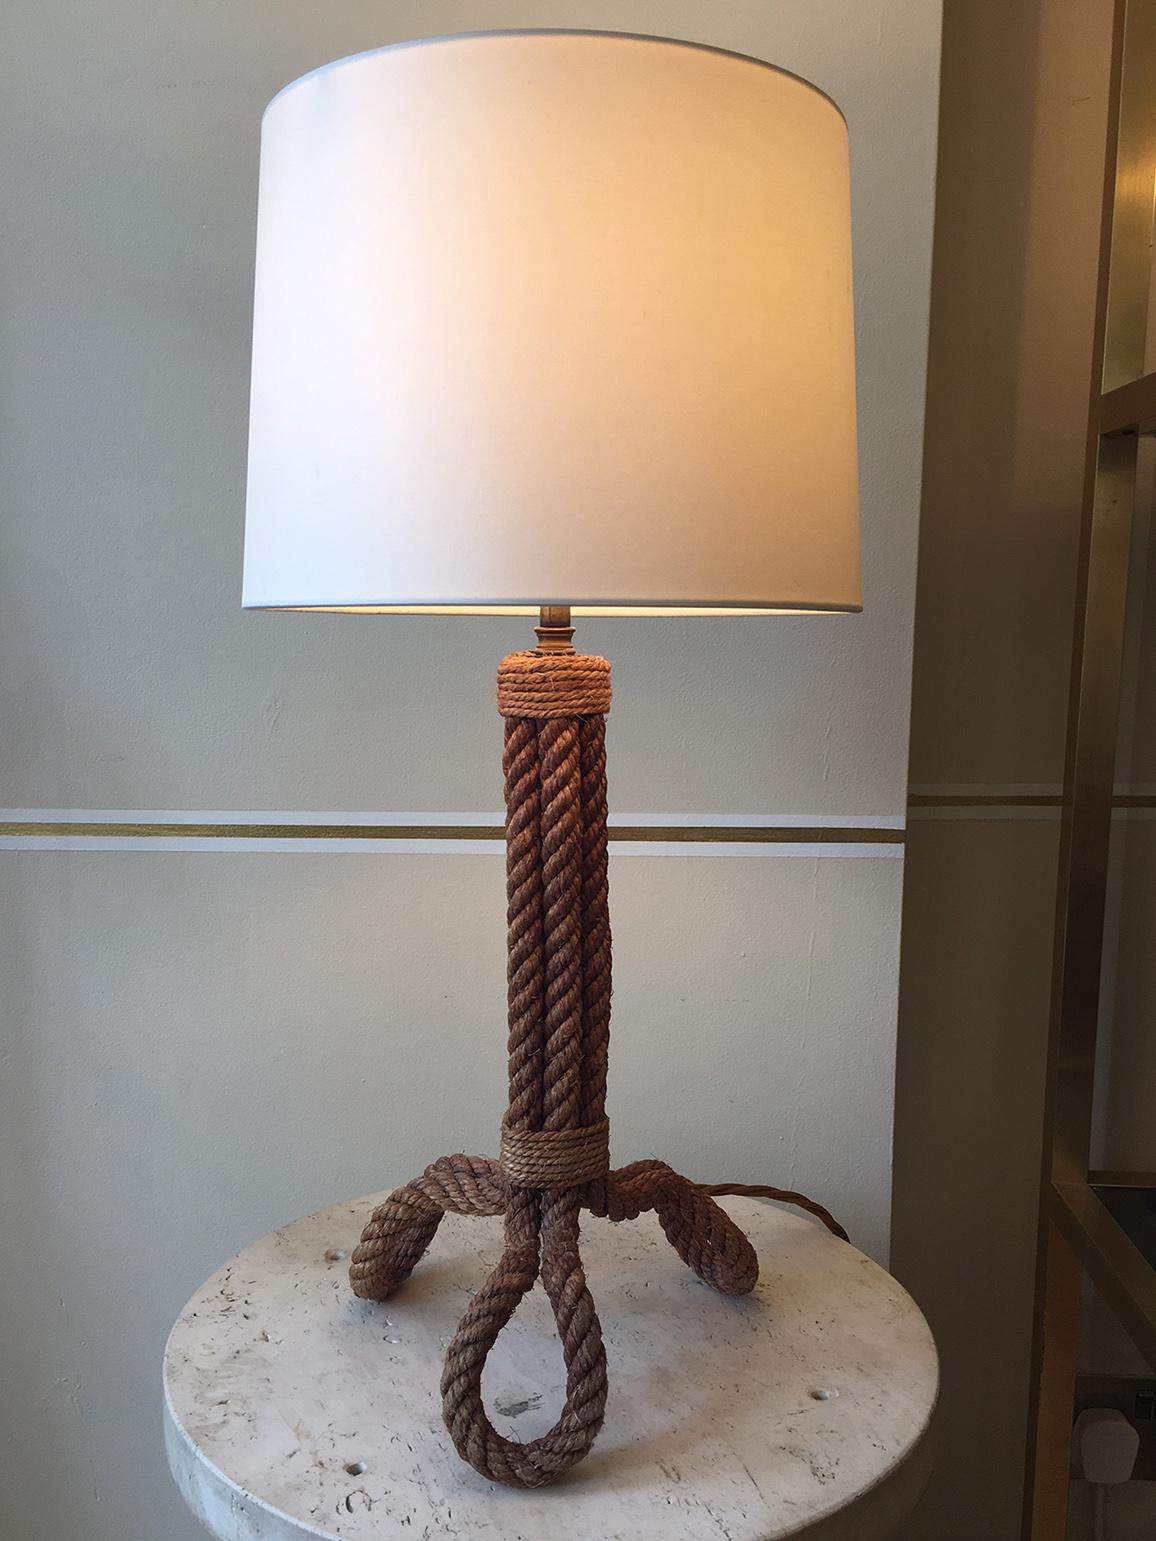 A rope tripod table lamp, by Audoux & Minet
France, circa 1950.